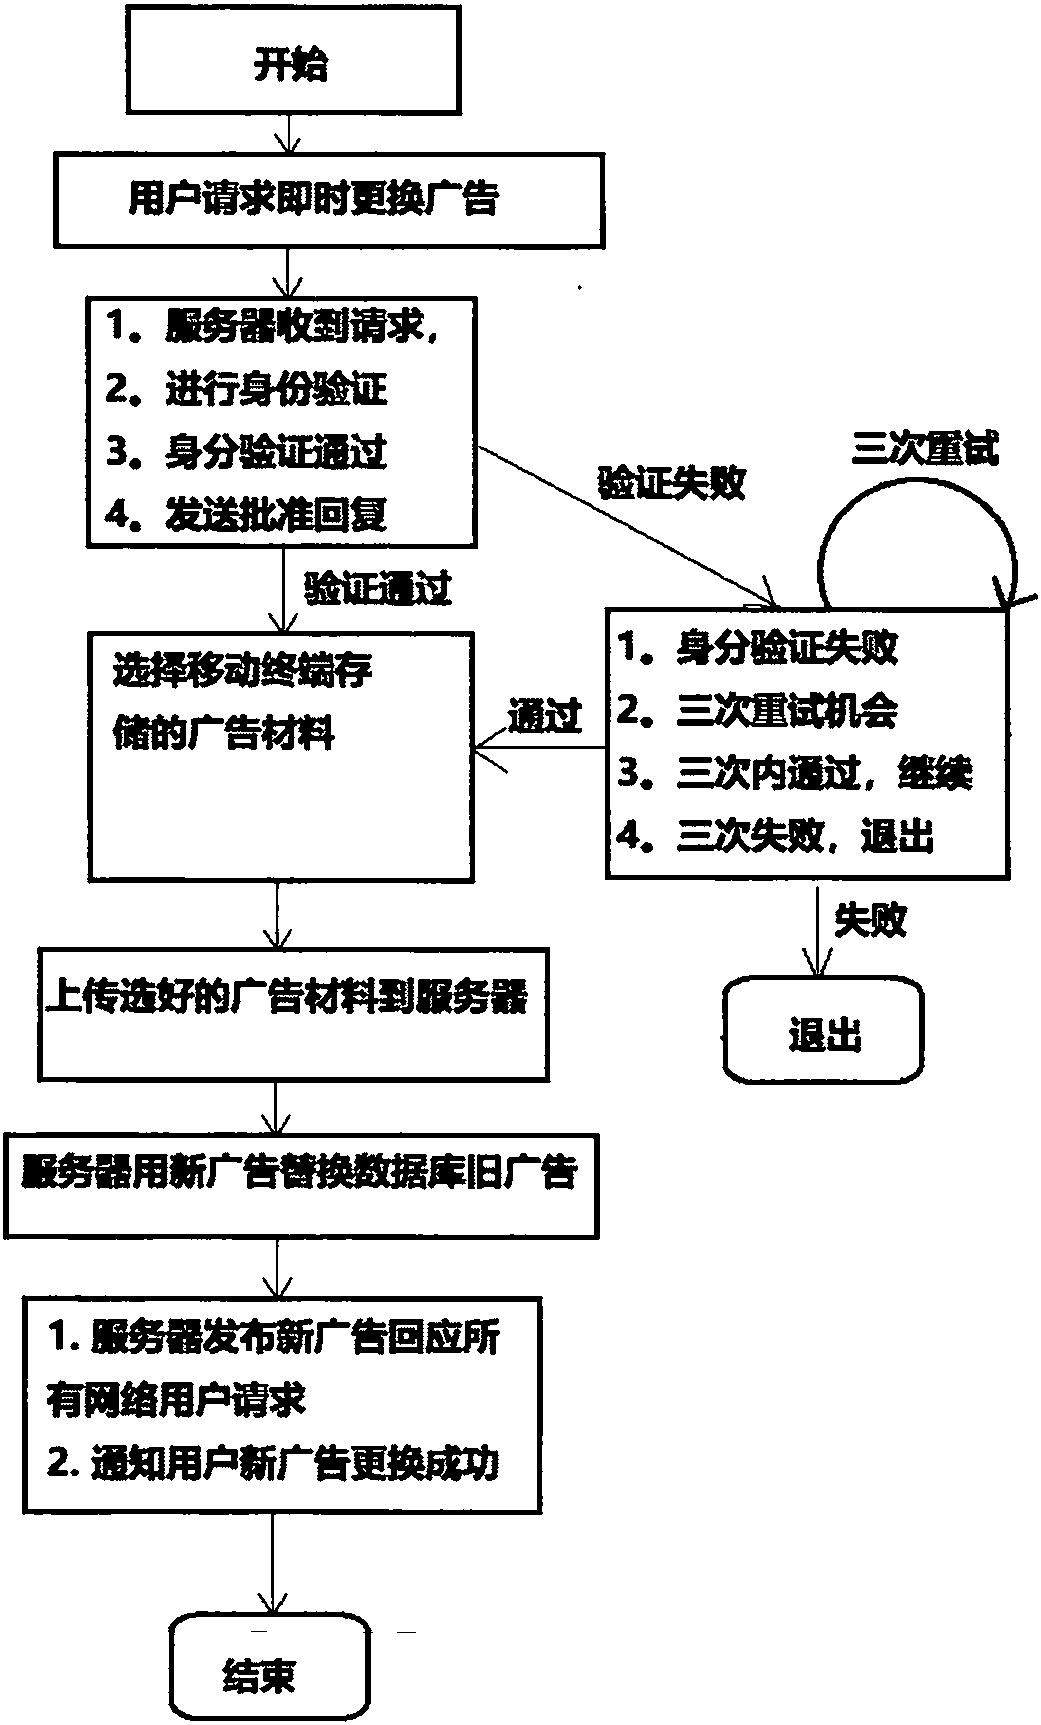 Method for dynamic replacement of label advertisements on network map business icon interface